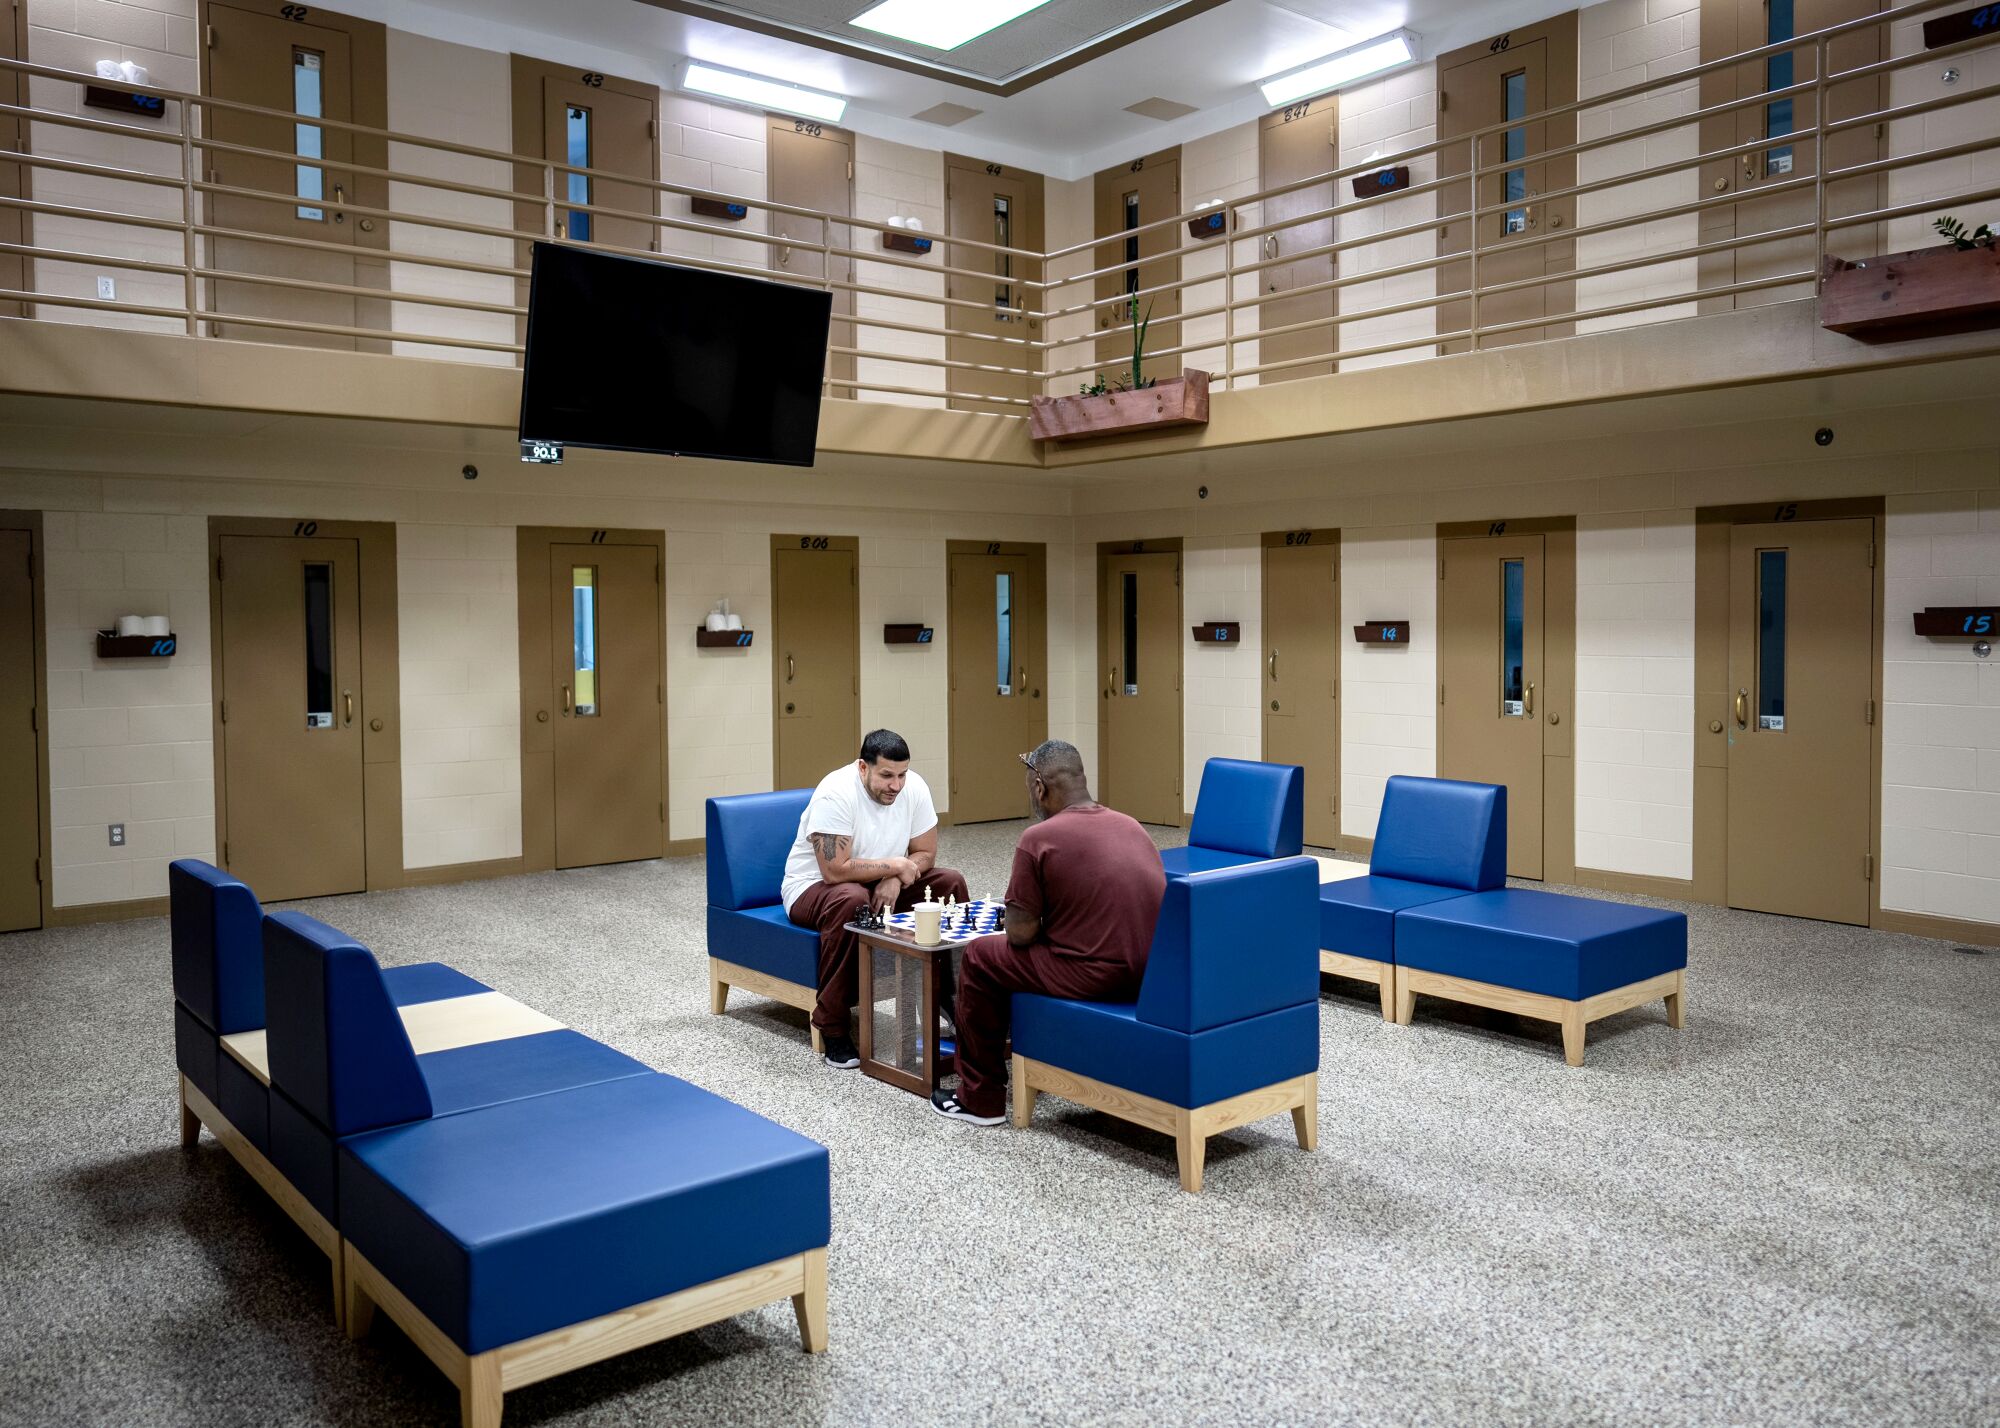 Two prisoners are sitting in the middle of a prison block and playing chess.  There is a TV attached to the railing of the second floor of the cell units.